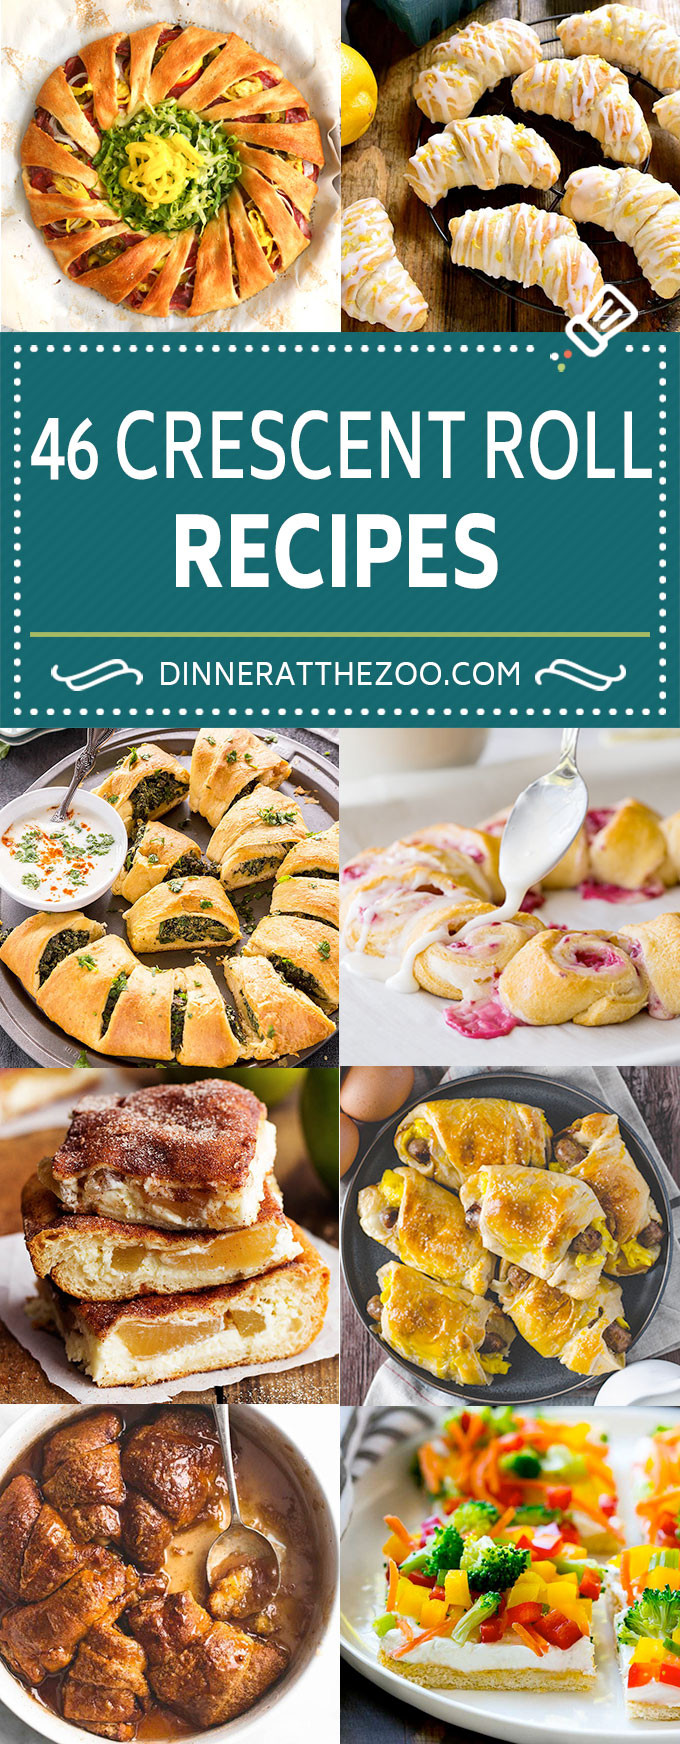 Appetizers Made With Crescent Rolls
 46 Crescent Roll Recipes Dinner at the Zoo